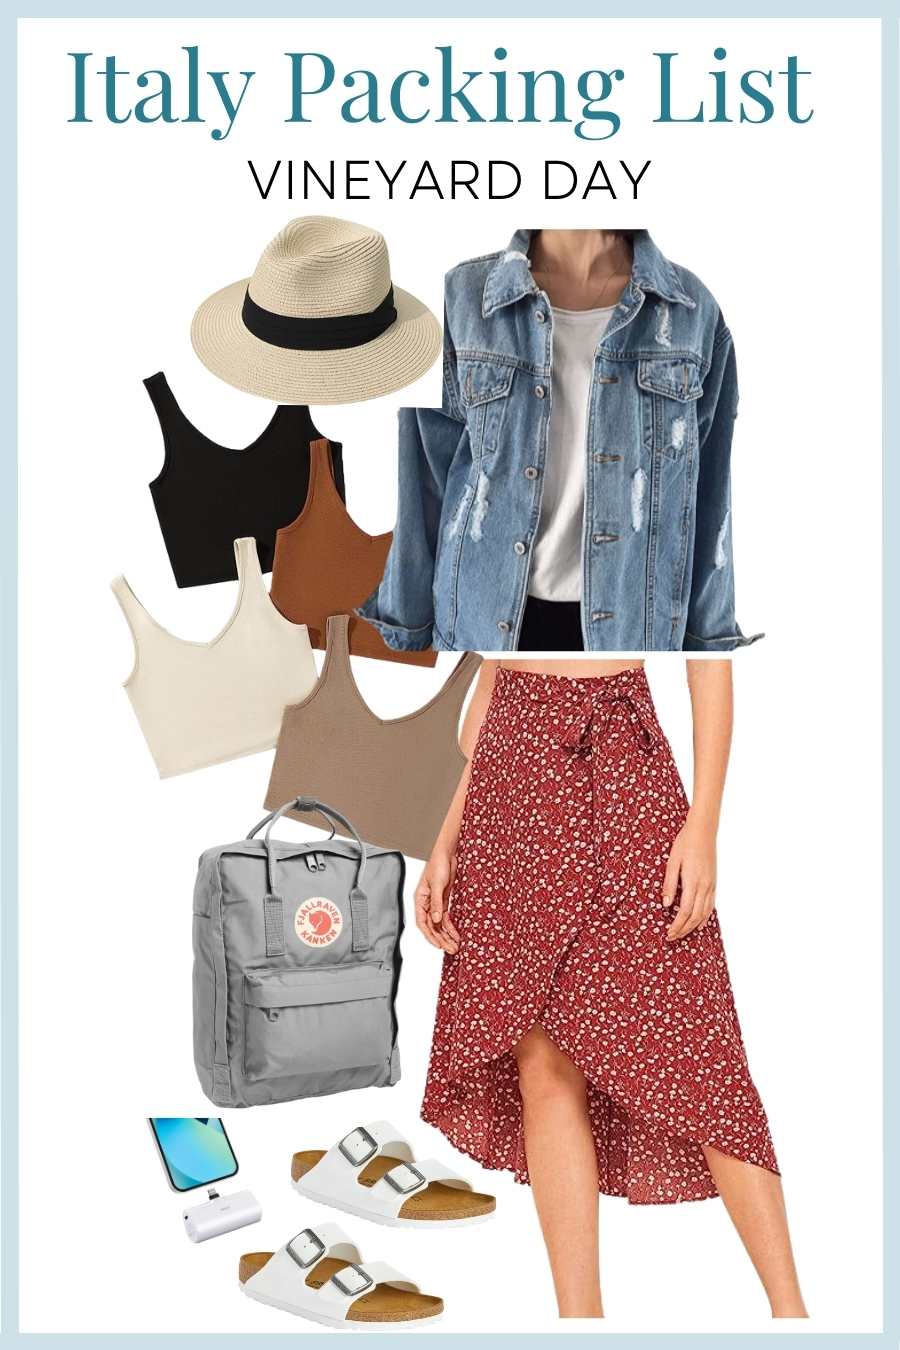 Italy packing list vineyard day outfit